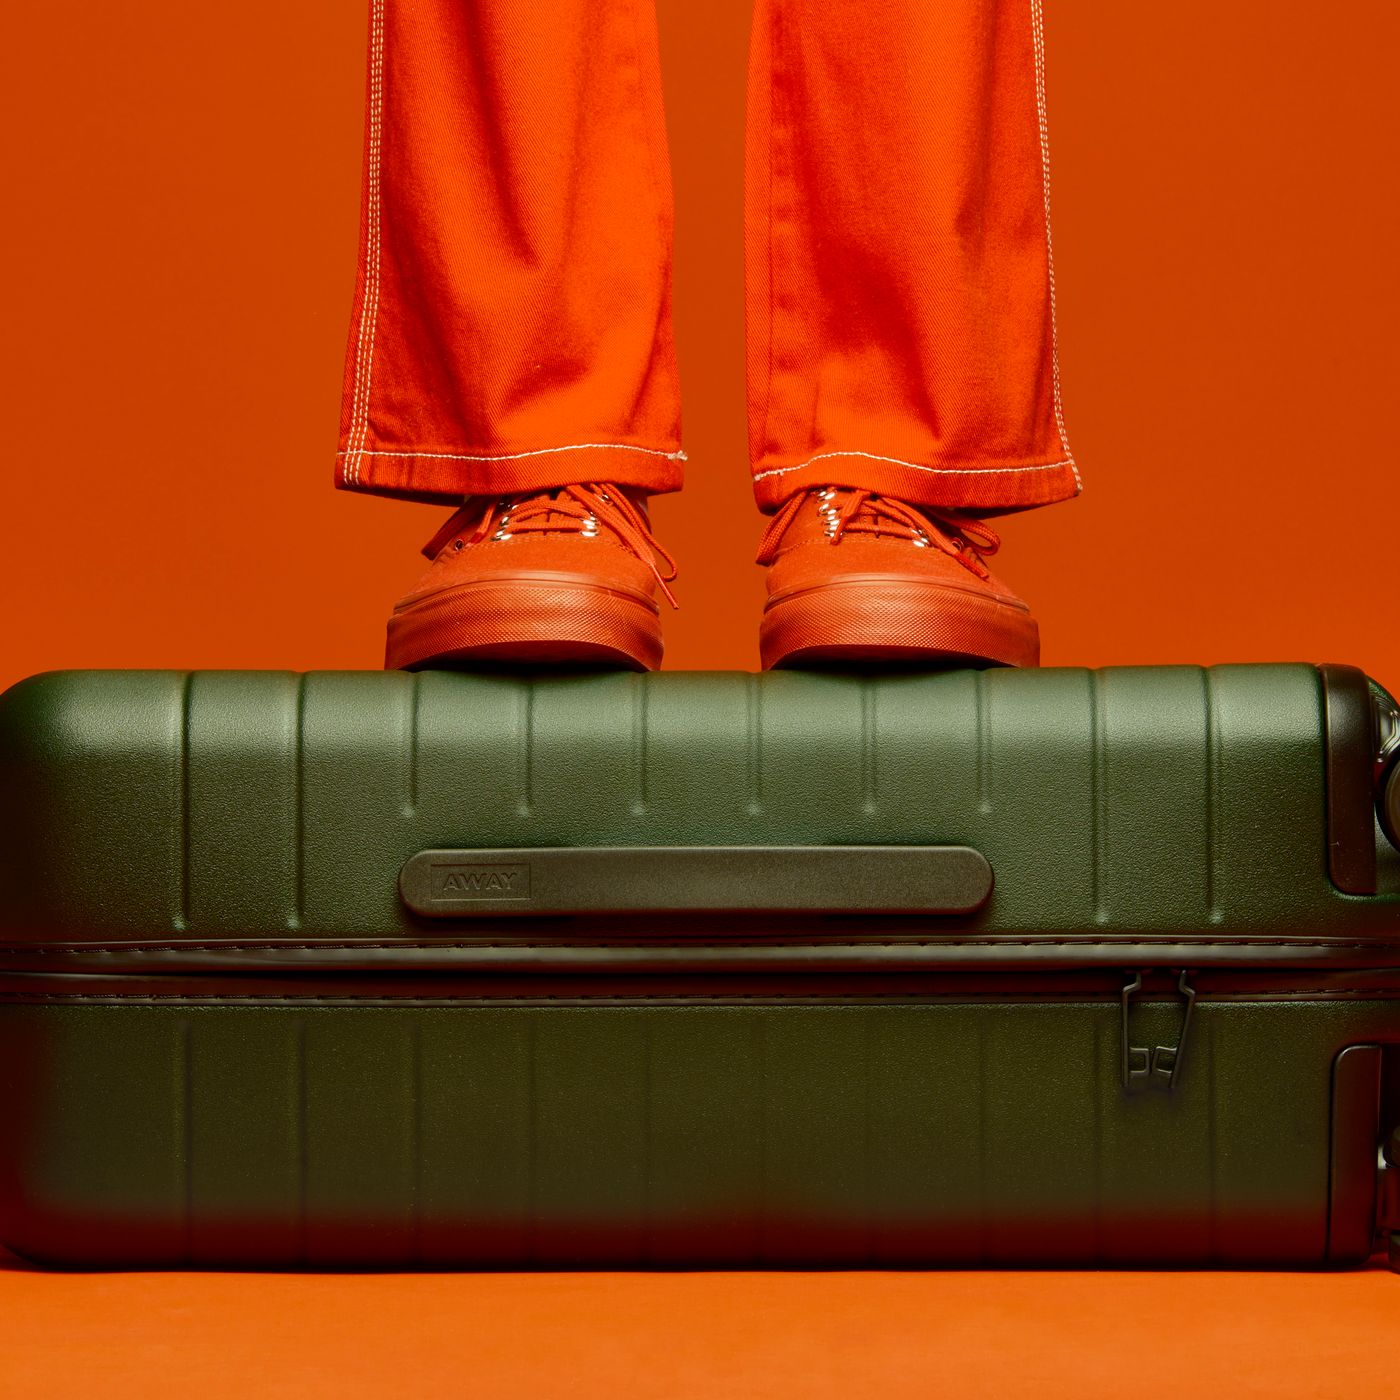 Taking Off: The Just-Dropped Travel Gear We're Coveting, From